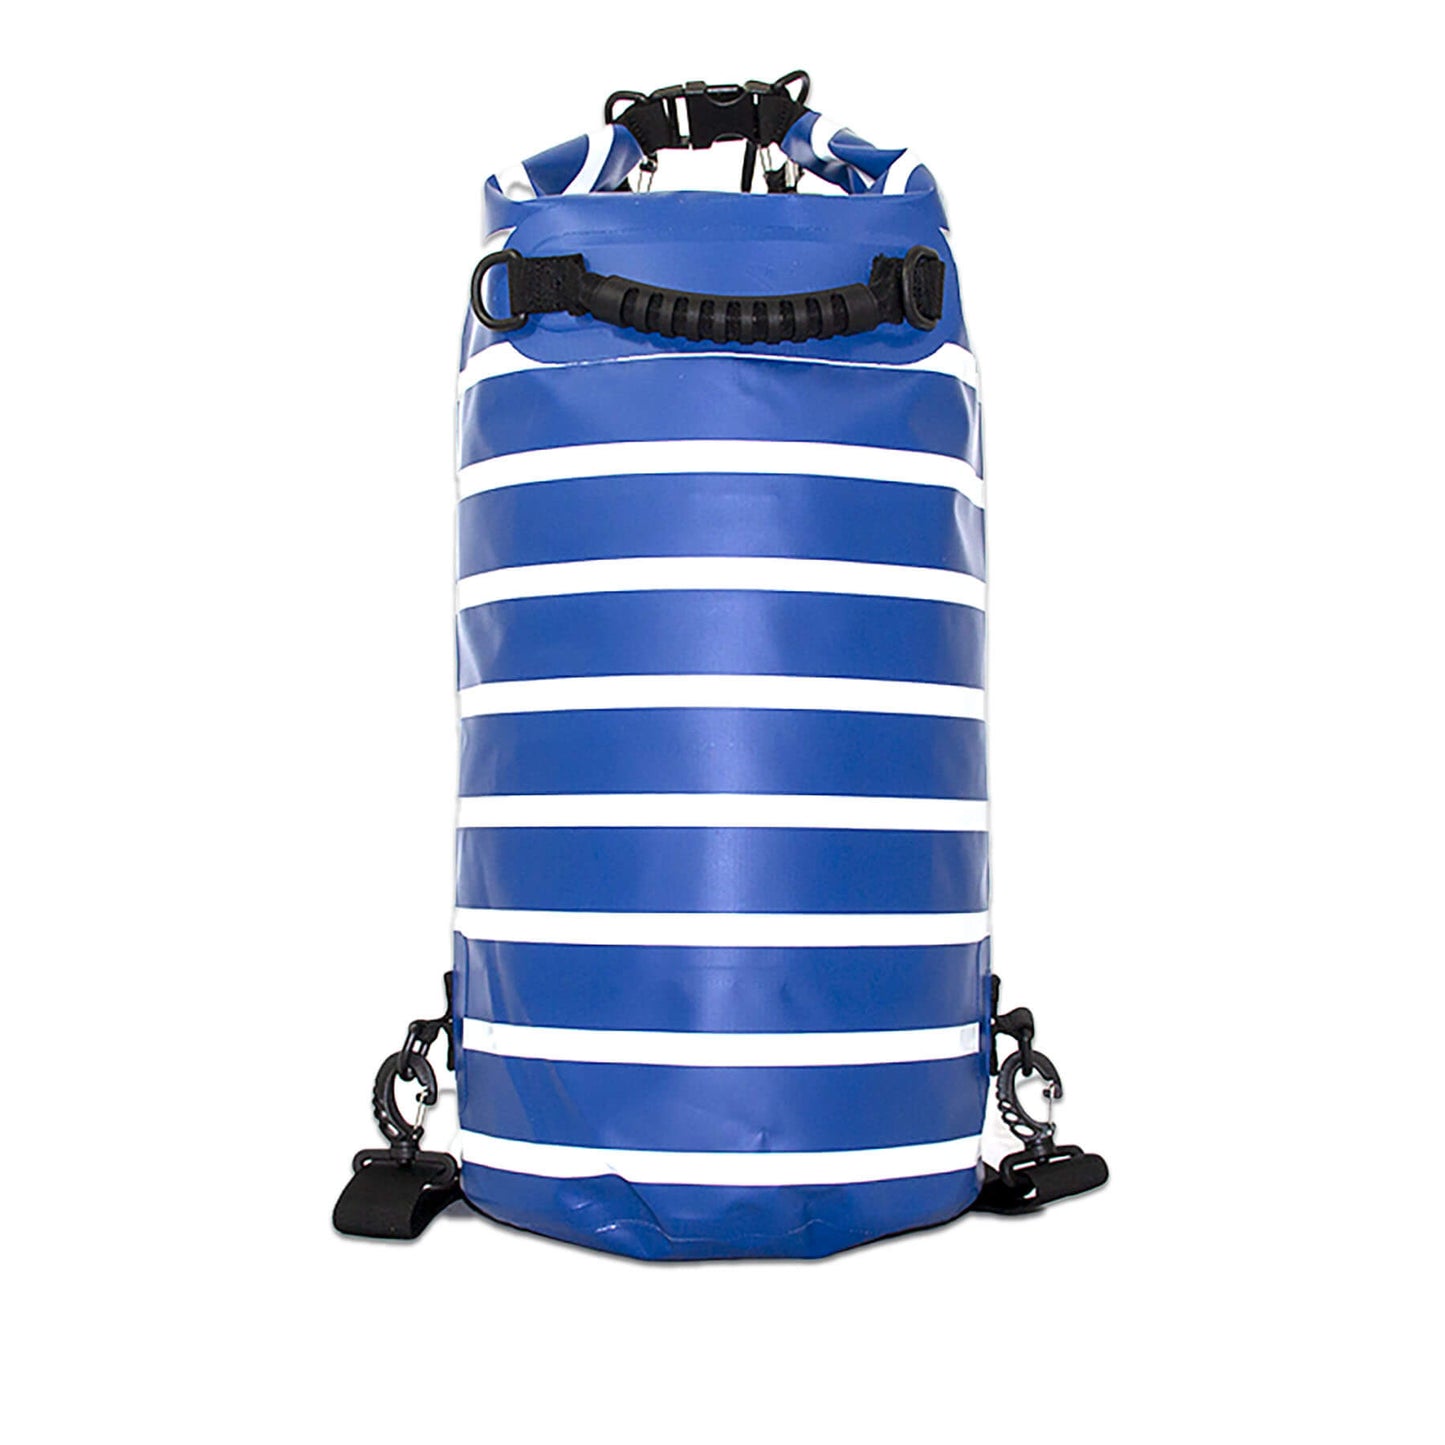 waterproof dry bag 20 litres with detachable comfort straps, D rings and handle in blue and white stripe design front view 